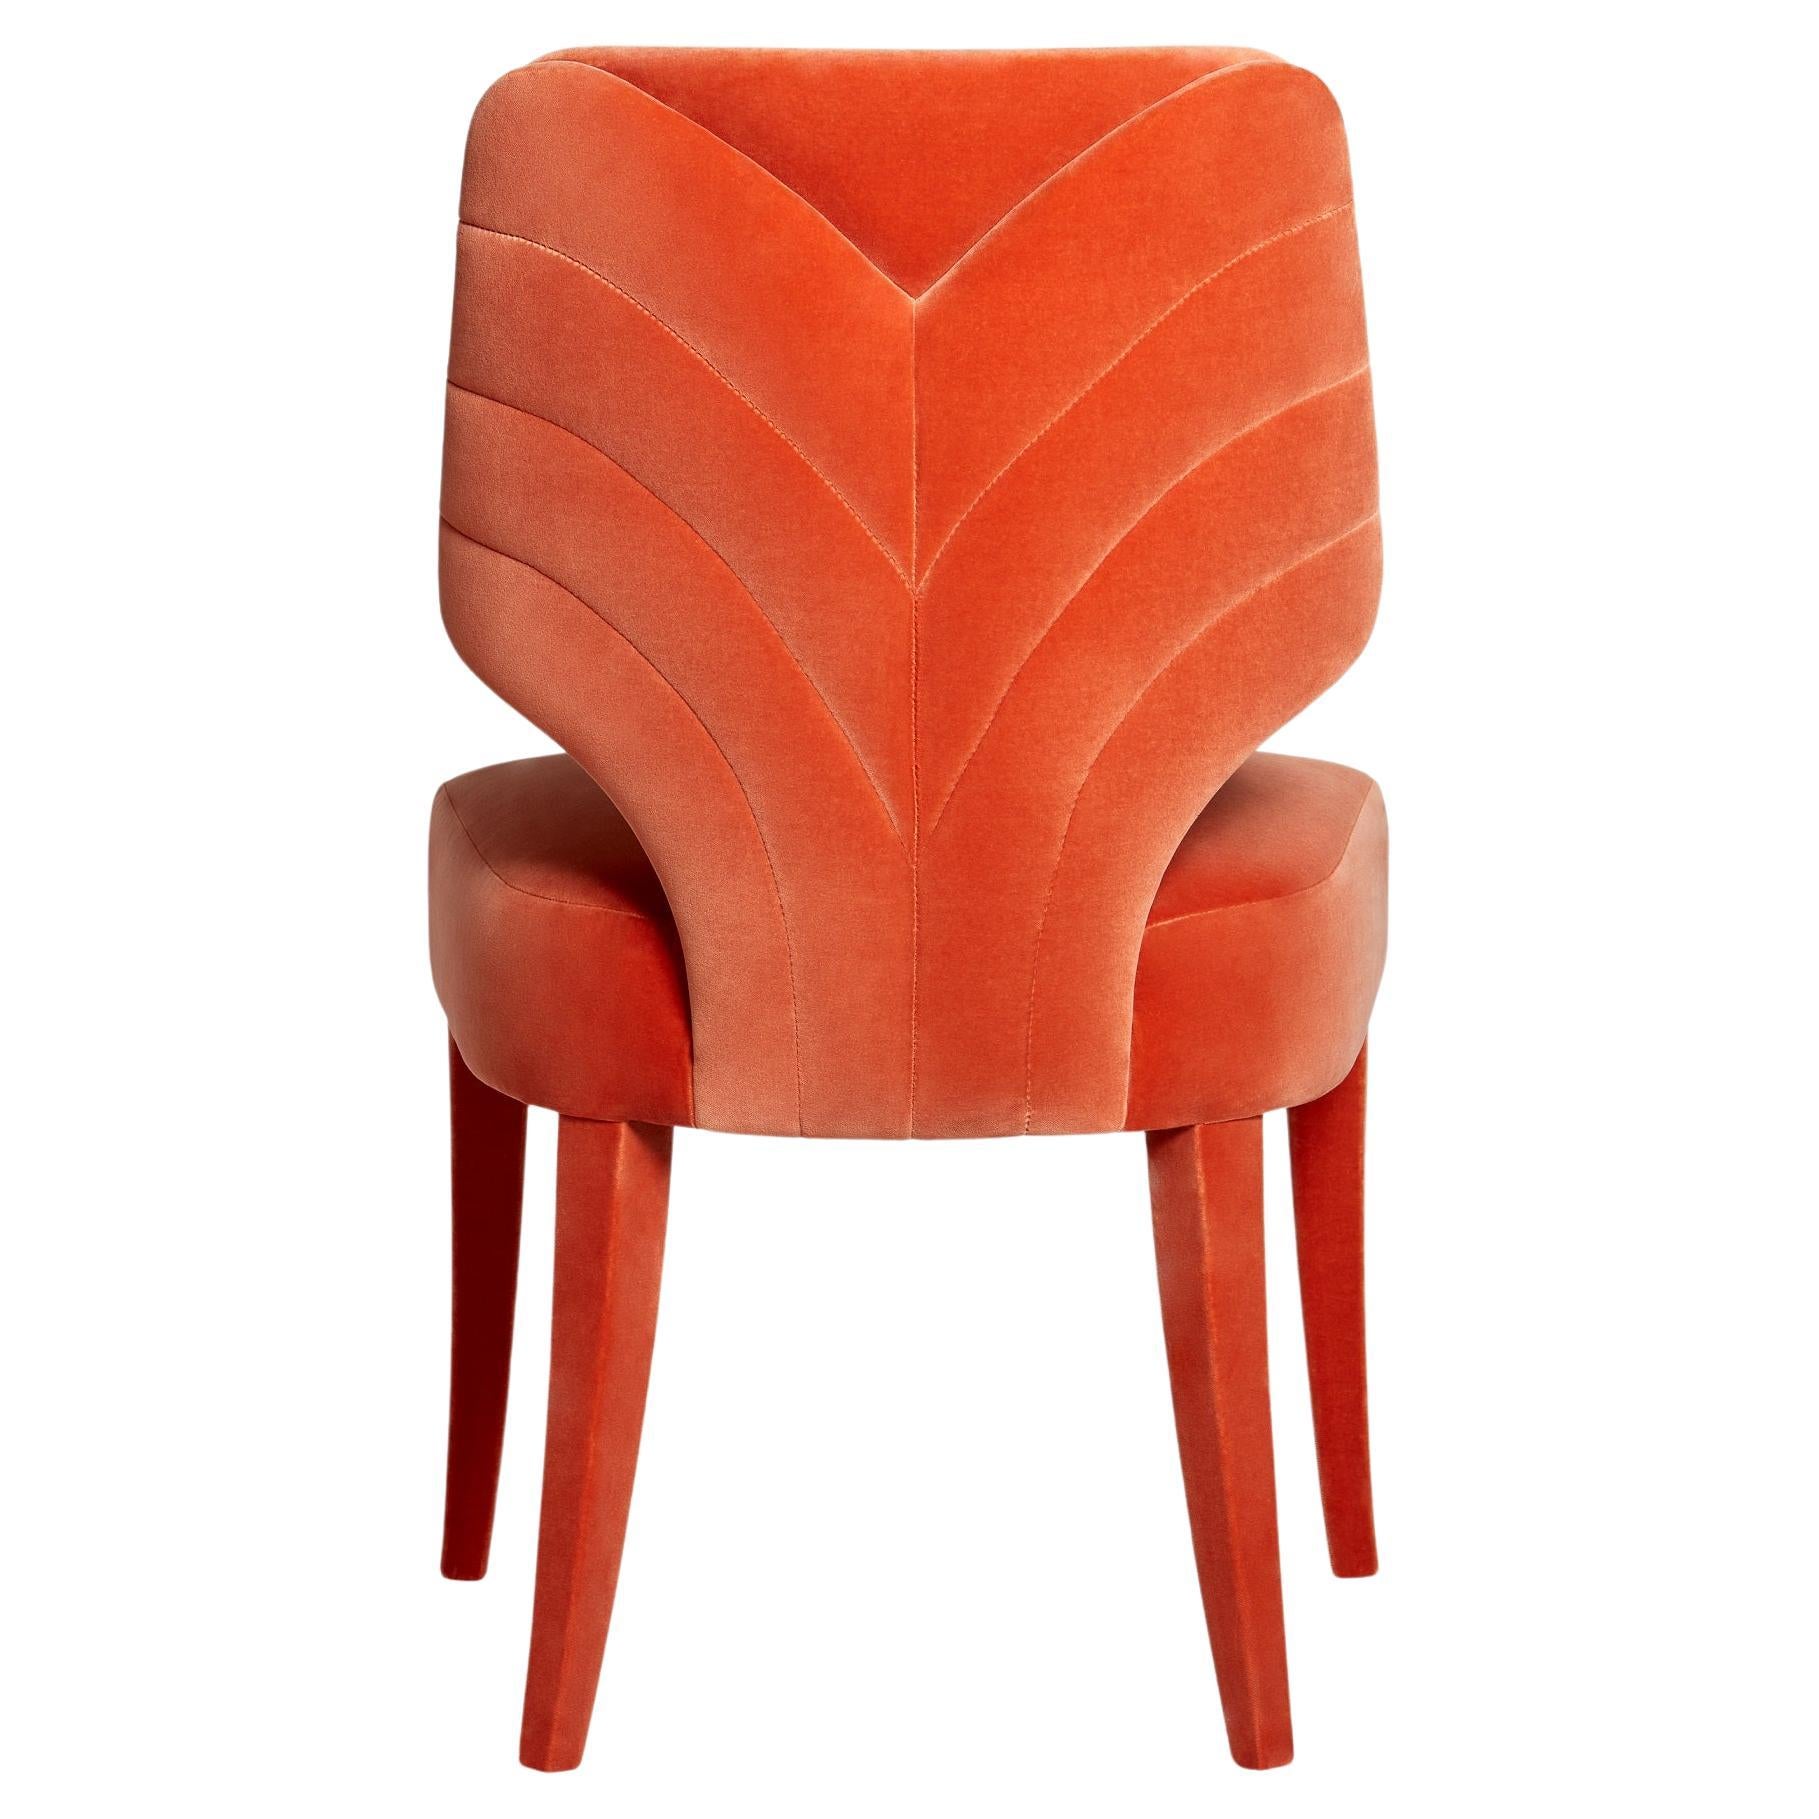 Contemporary Dining Chair with Seaming Details on the Back For Sale